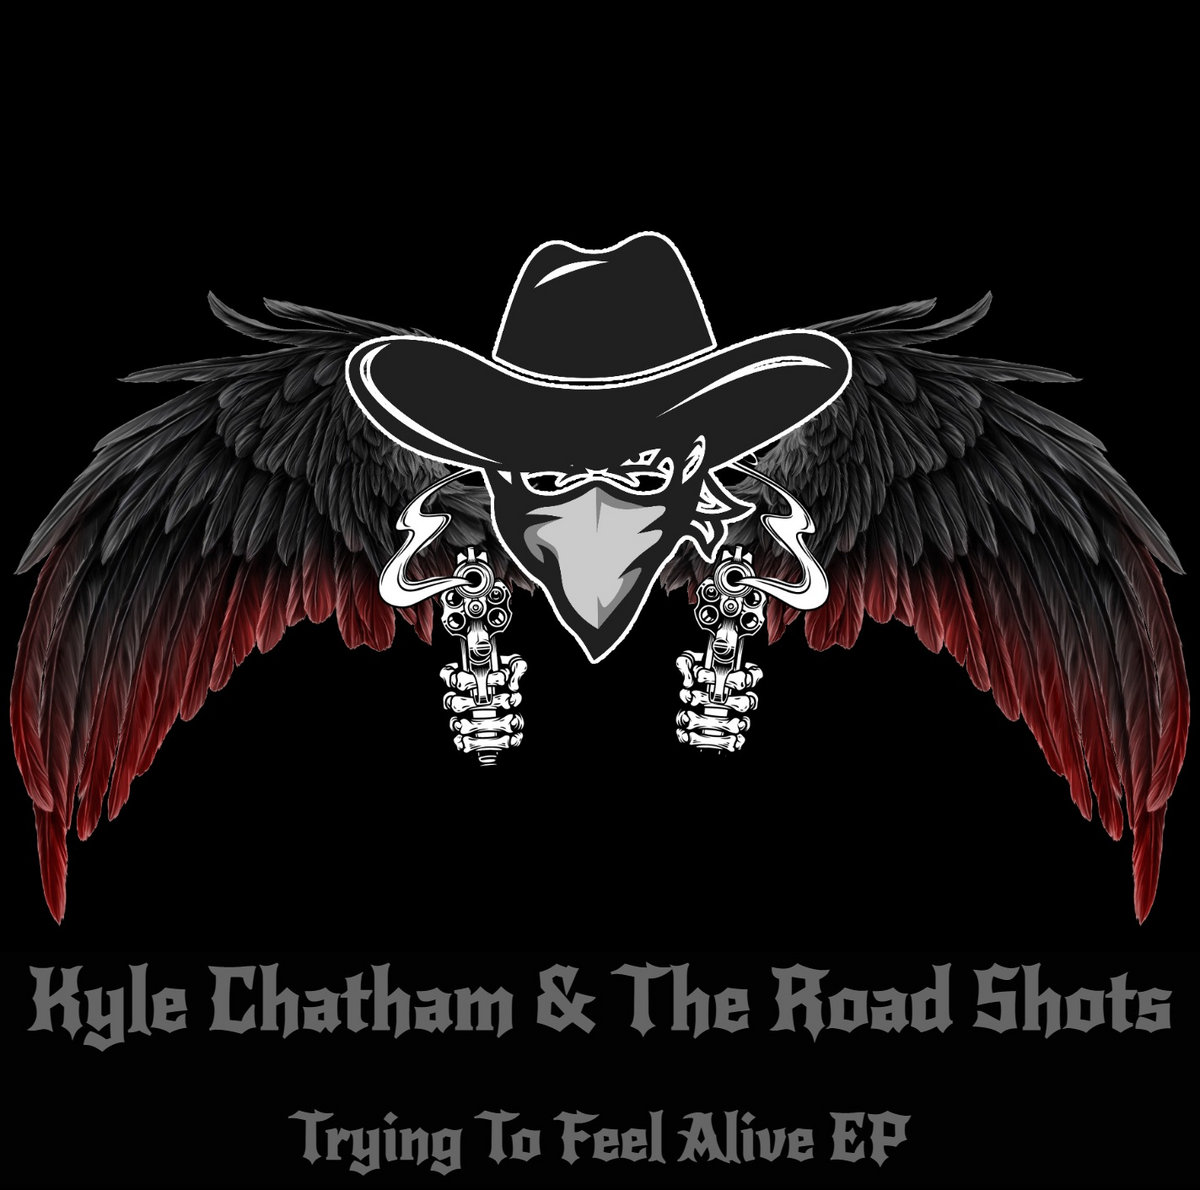 Trying To Feel Alive EP | Kyle Chatham & The Road Shots